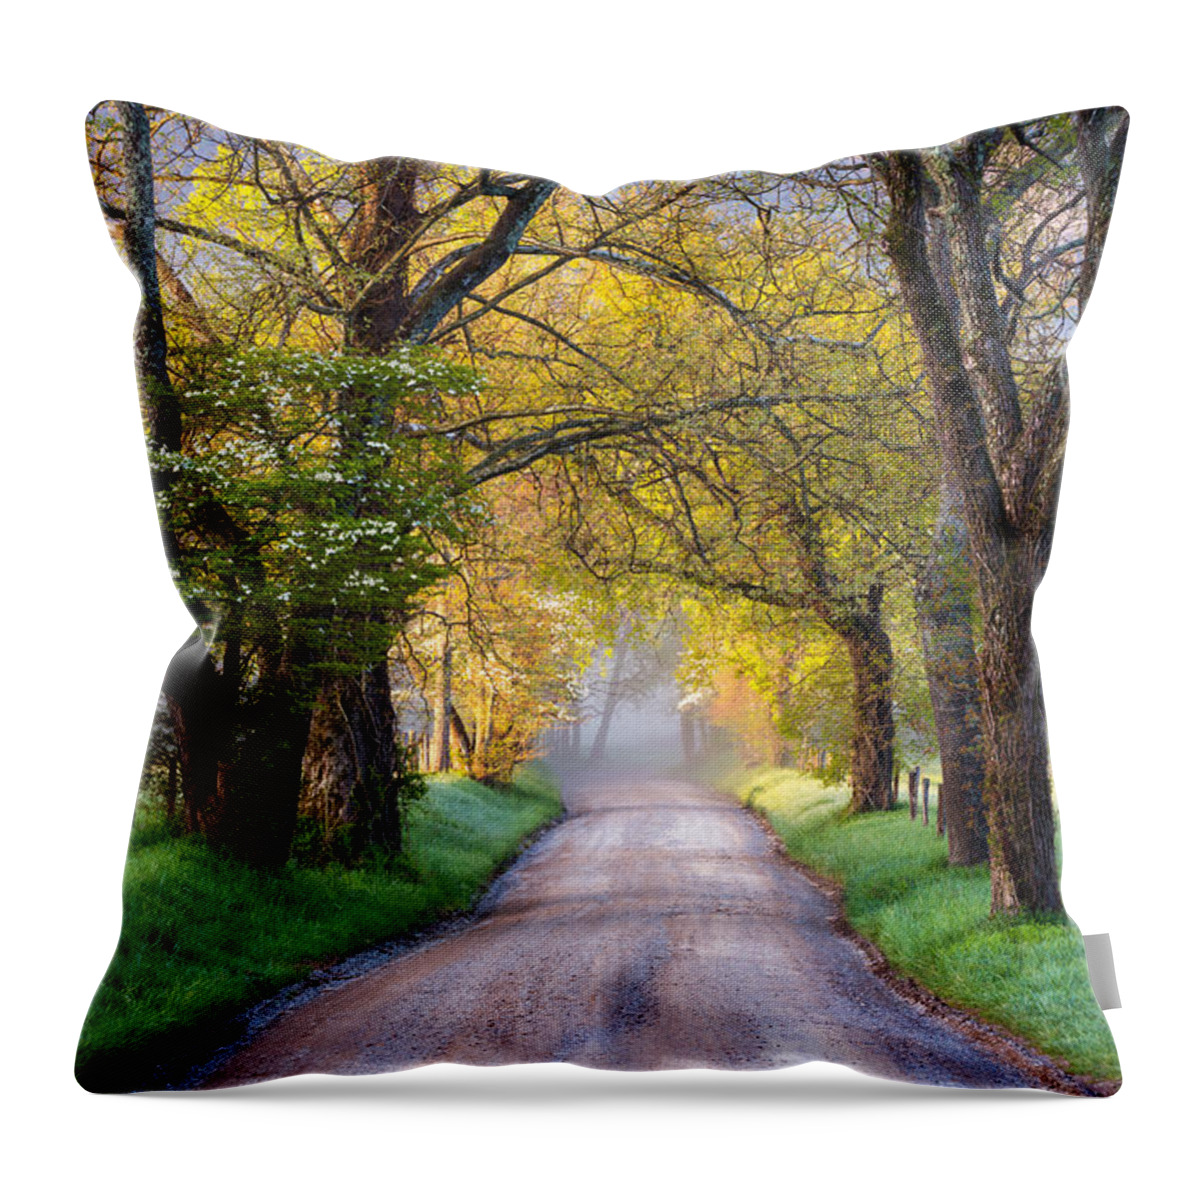 Cades Cove Throw Pillow featuring the photograph Cades Cove Great Smoky Mountains National Park - Sparks Lane by Dave Allen